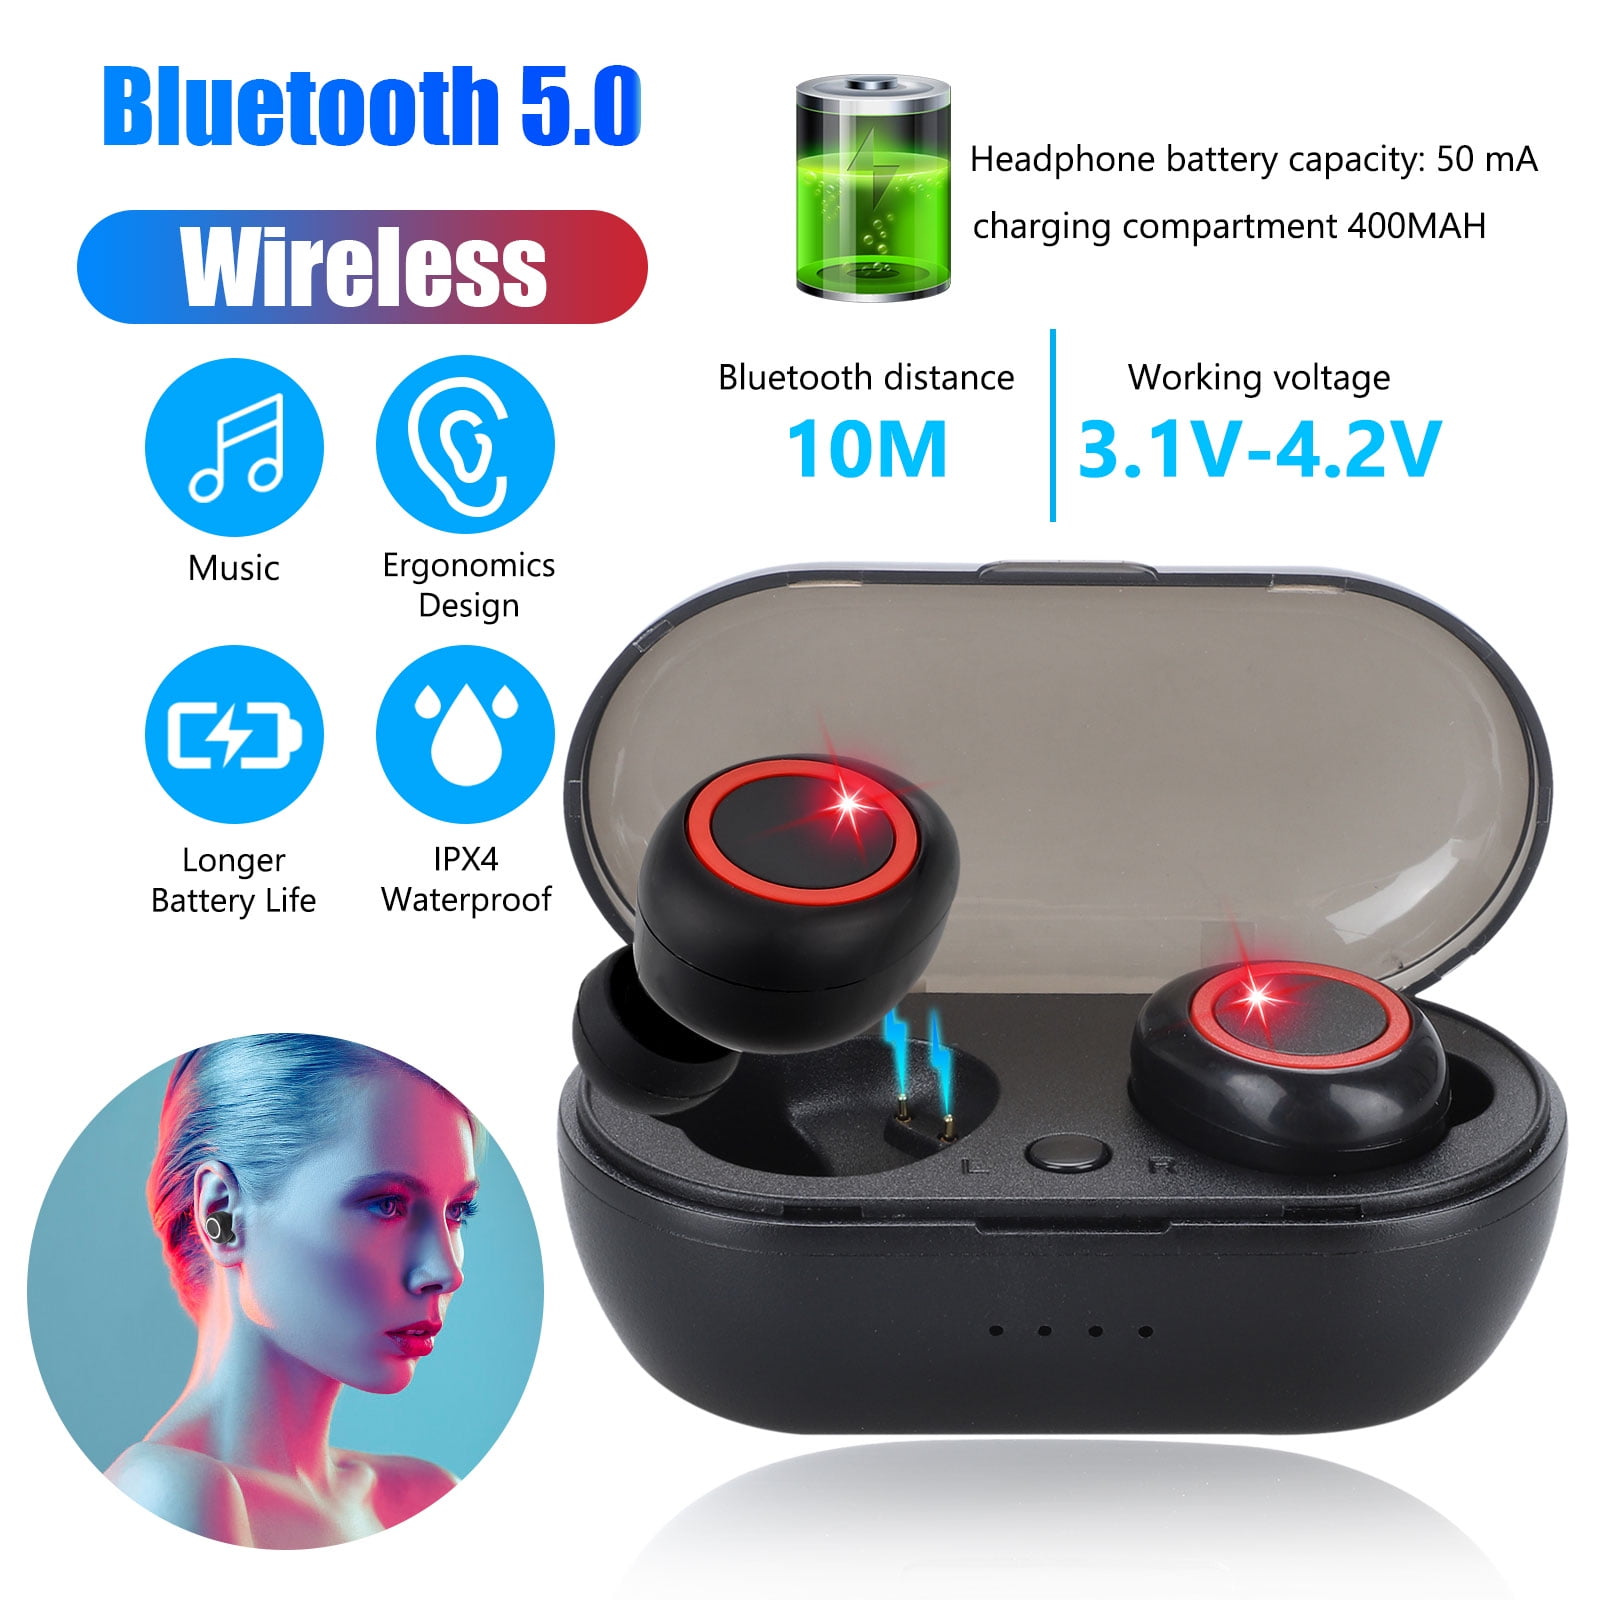 Wireless Earbuds,TWS Stereo Deep Bass Headset Waterproof Headphones in-Ear Touch Control Earbuds Built-in Mic for Sport, Gym, Running, Compatible with iPhone Samsung Android